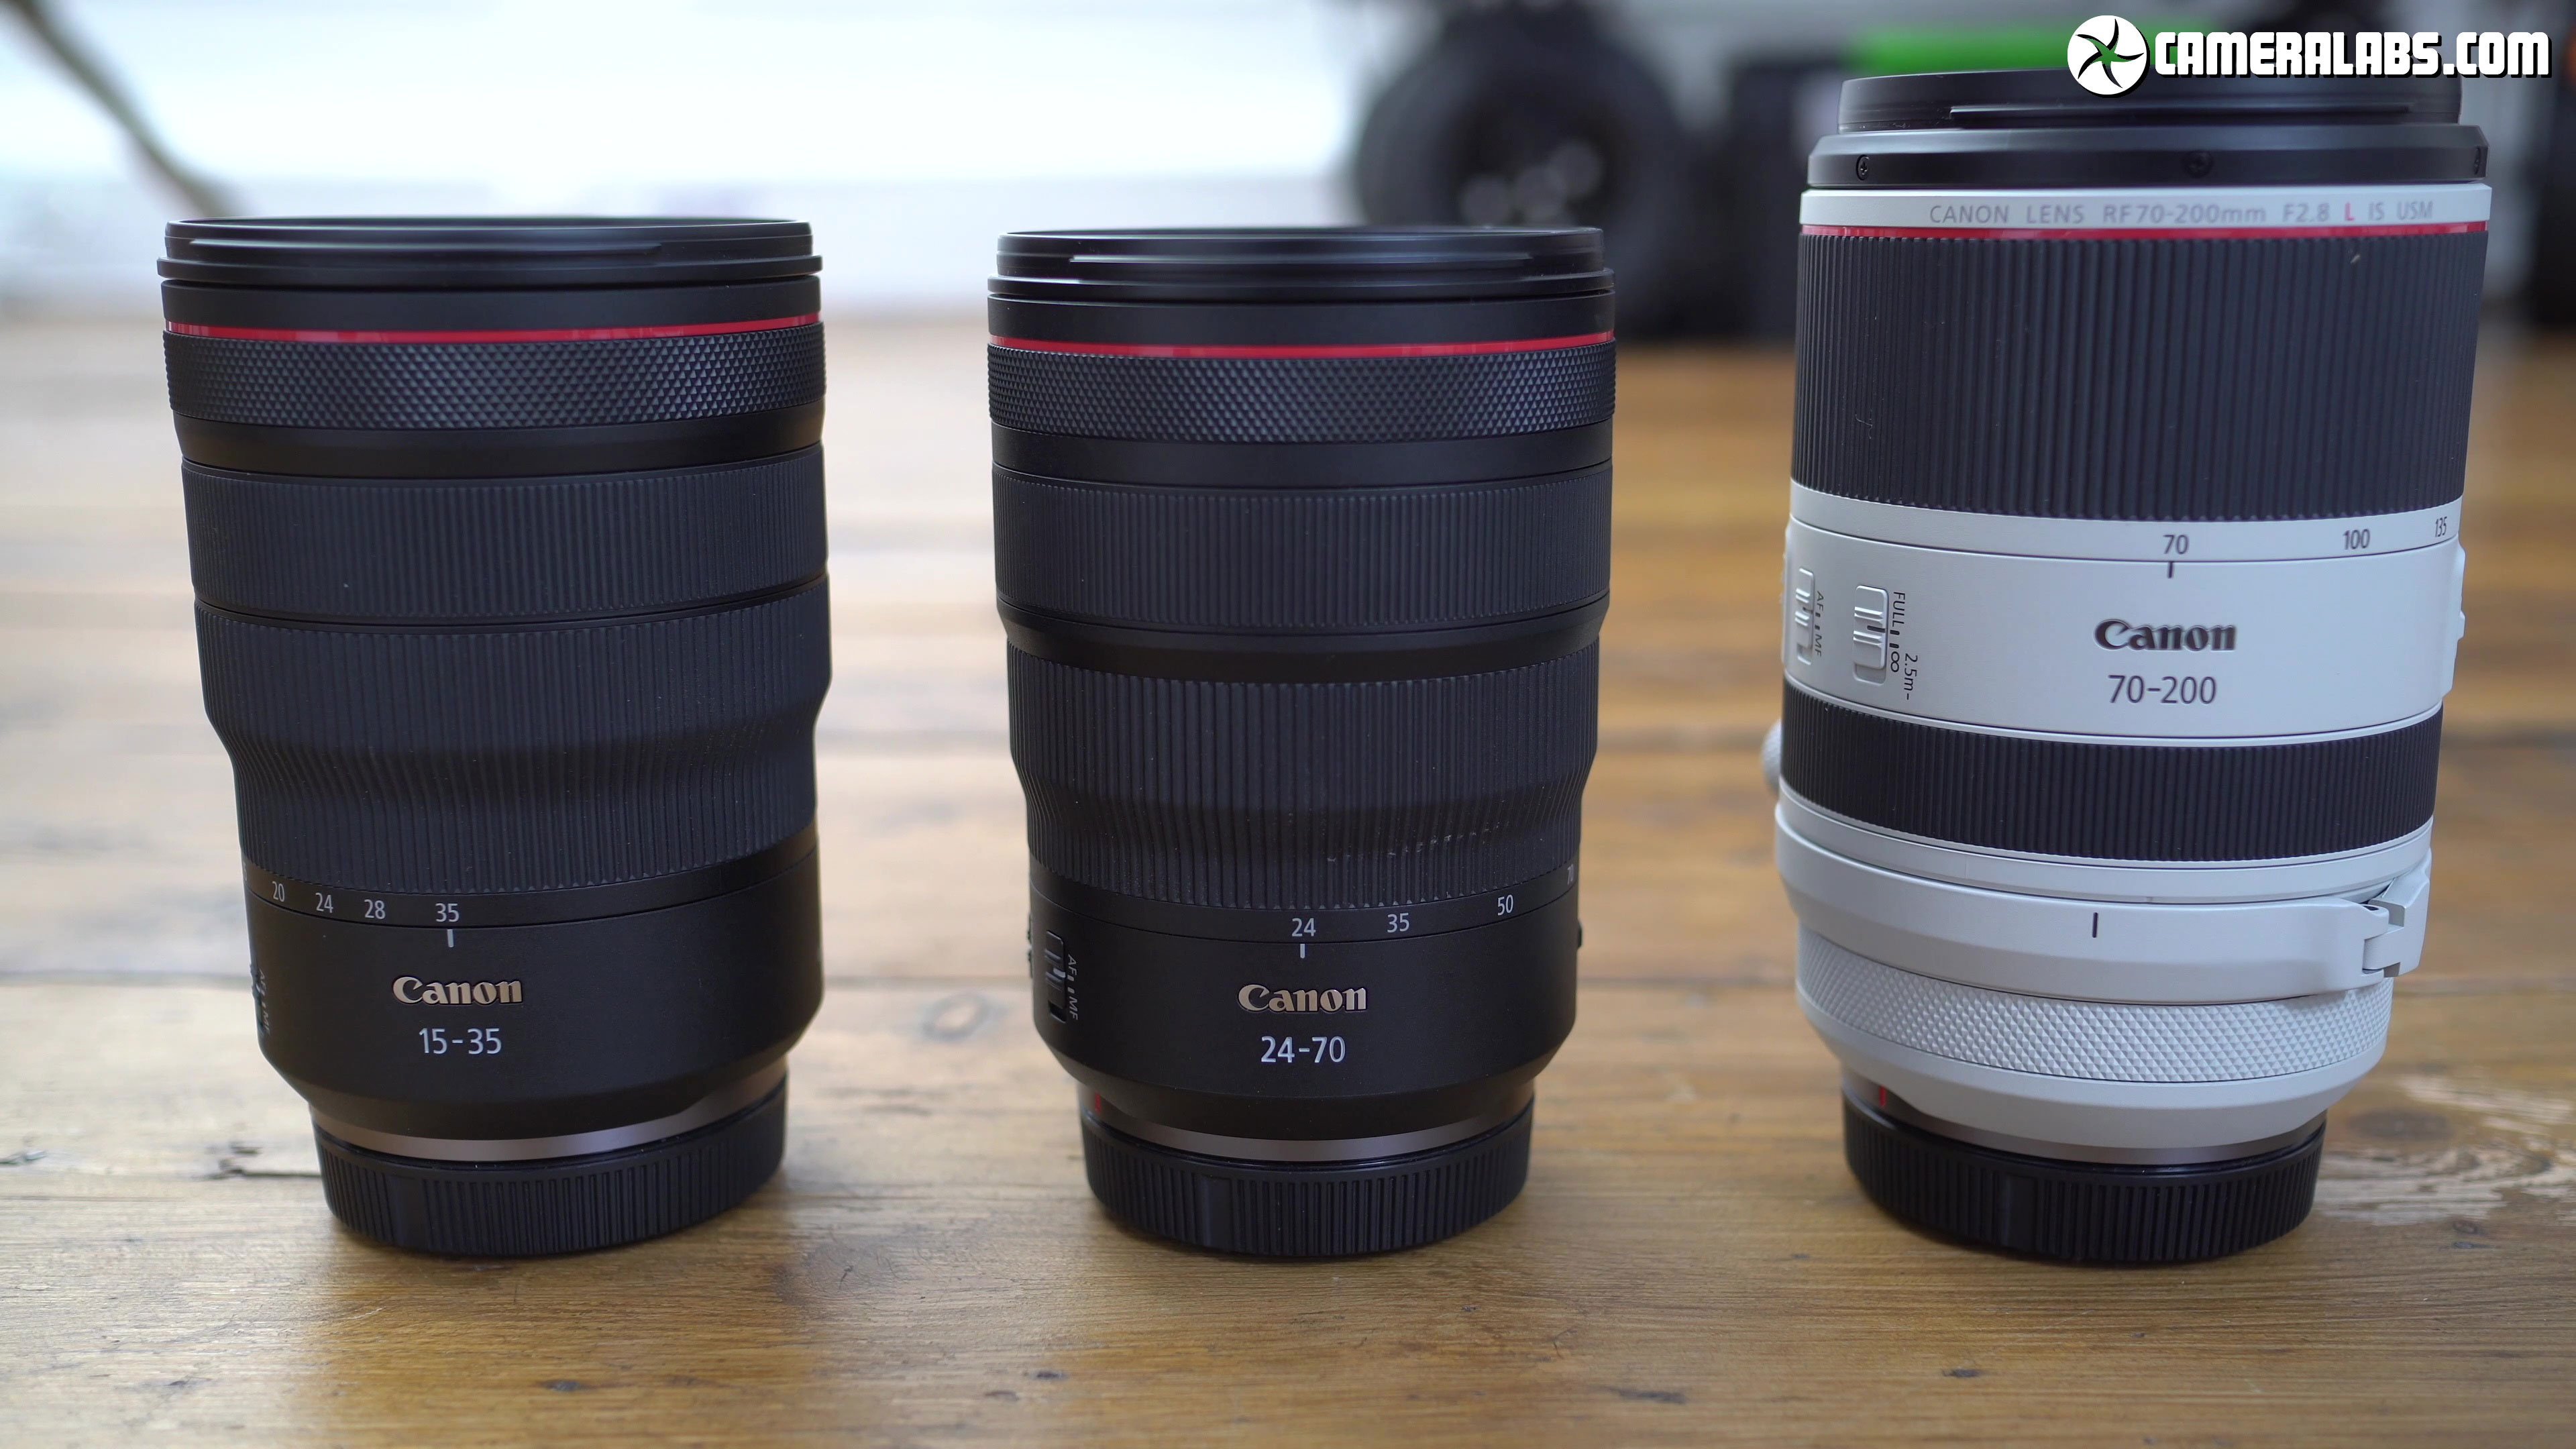 cafe leerling Zeug Best Canon Lenses | Cameralabs